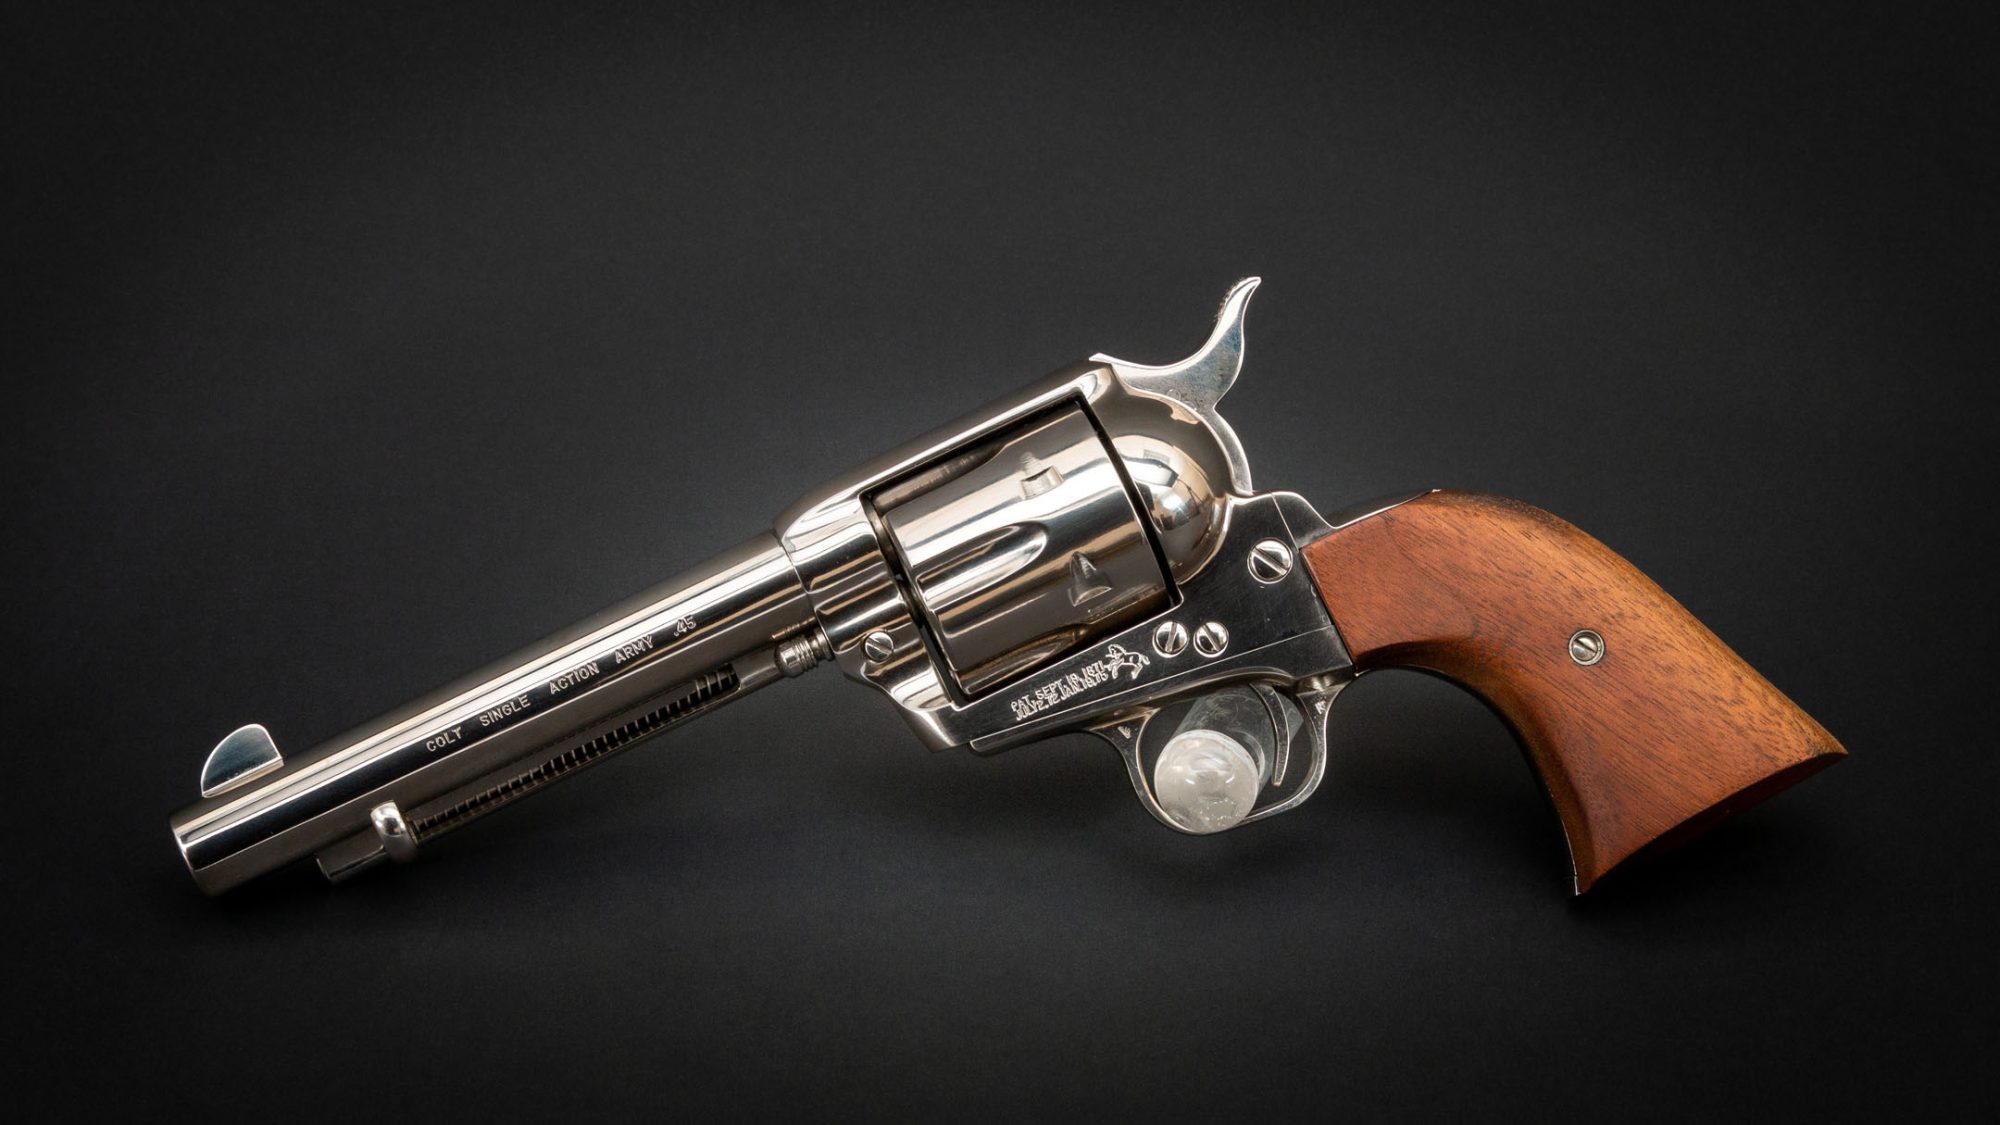 Nickel plated Colt SAA revolver in .45 Colt, for sale by Turnbull Restoration Co. of Bloomfield, NY